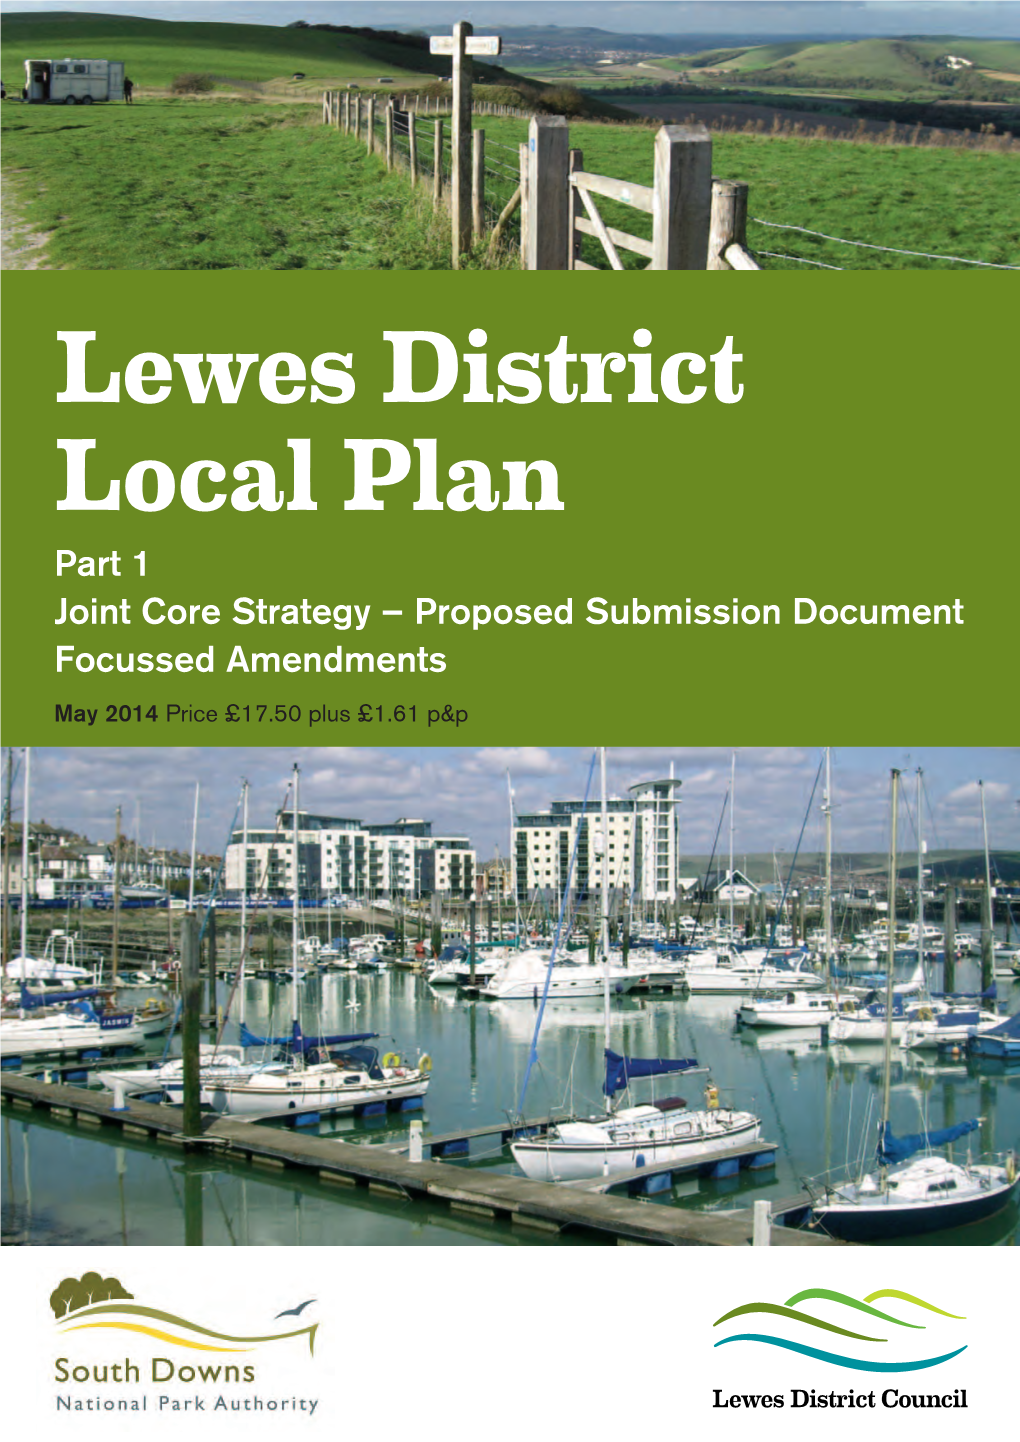 Lewes District Local Plan